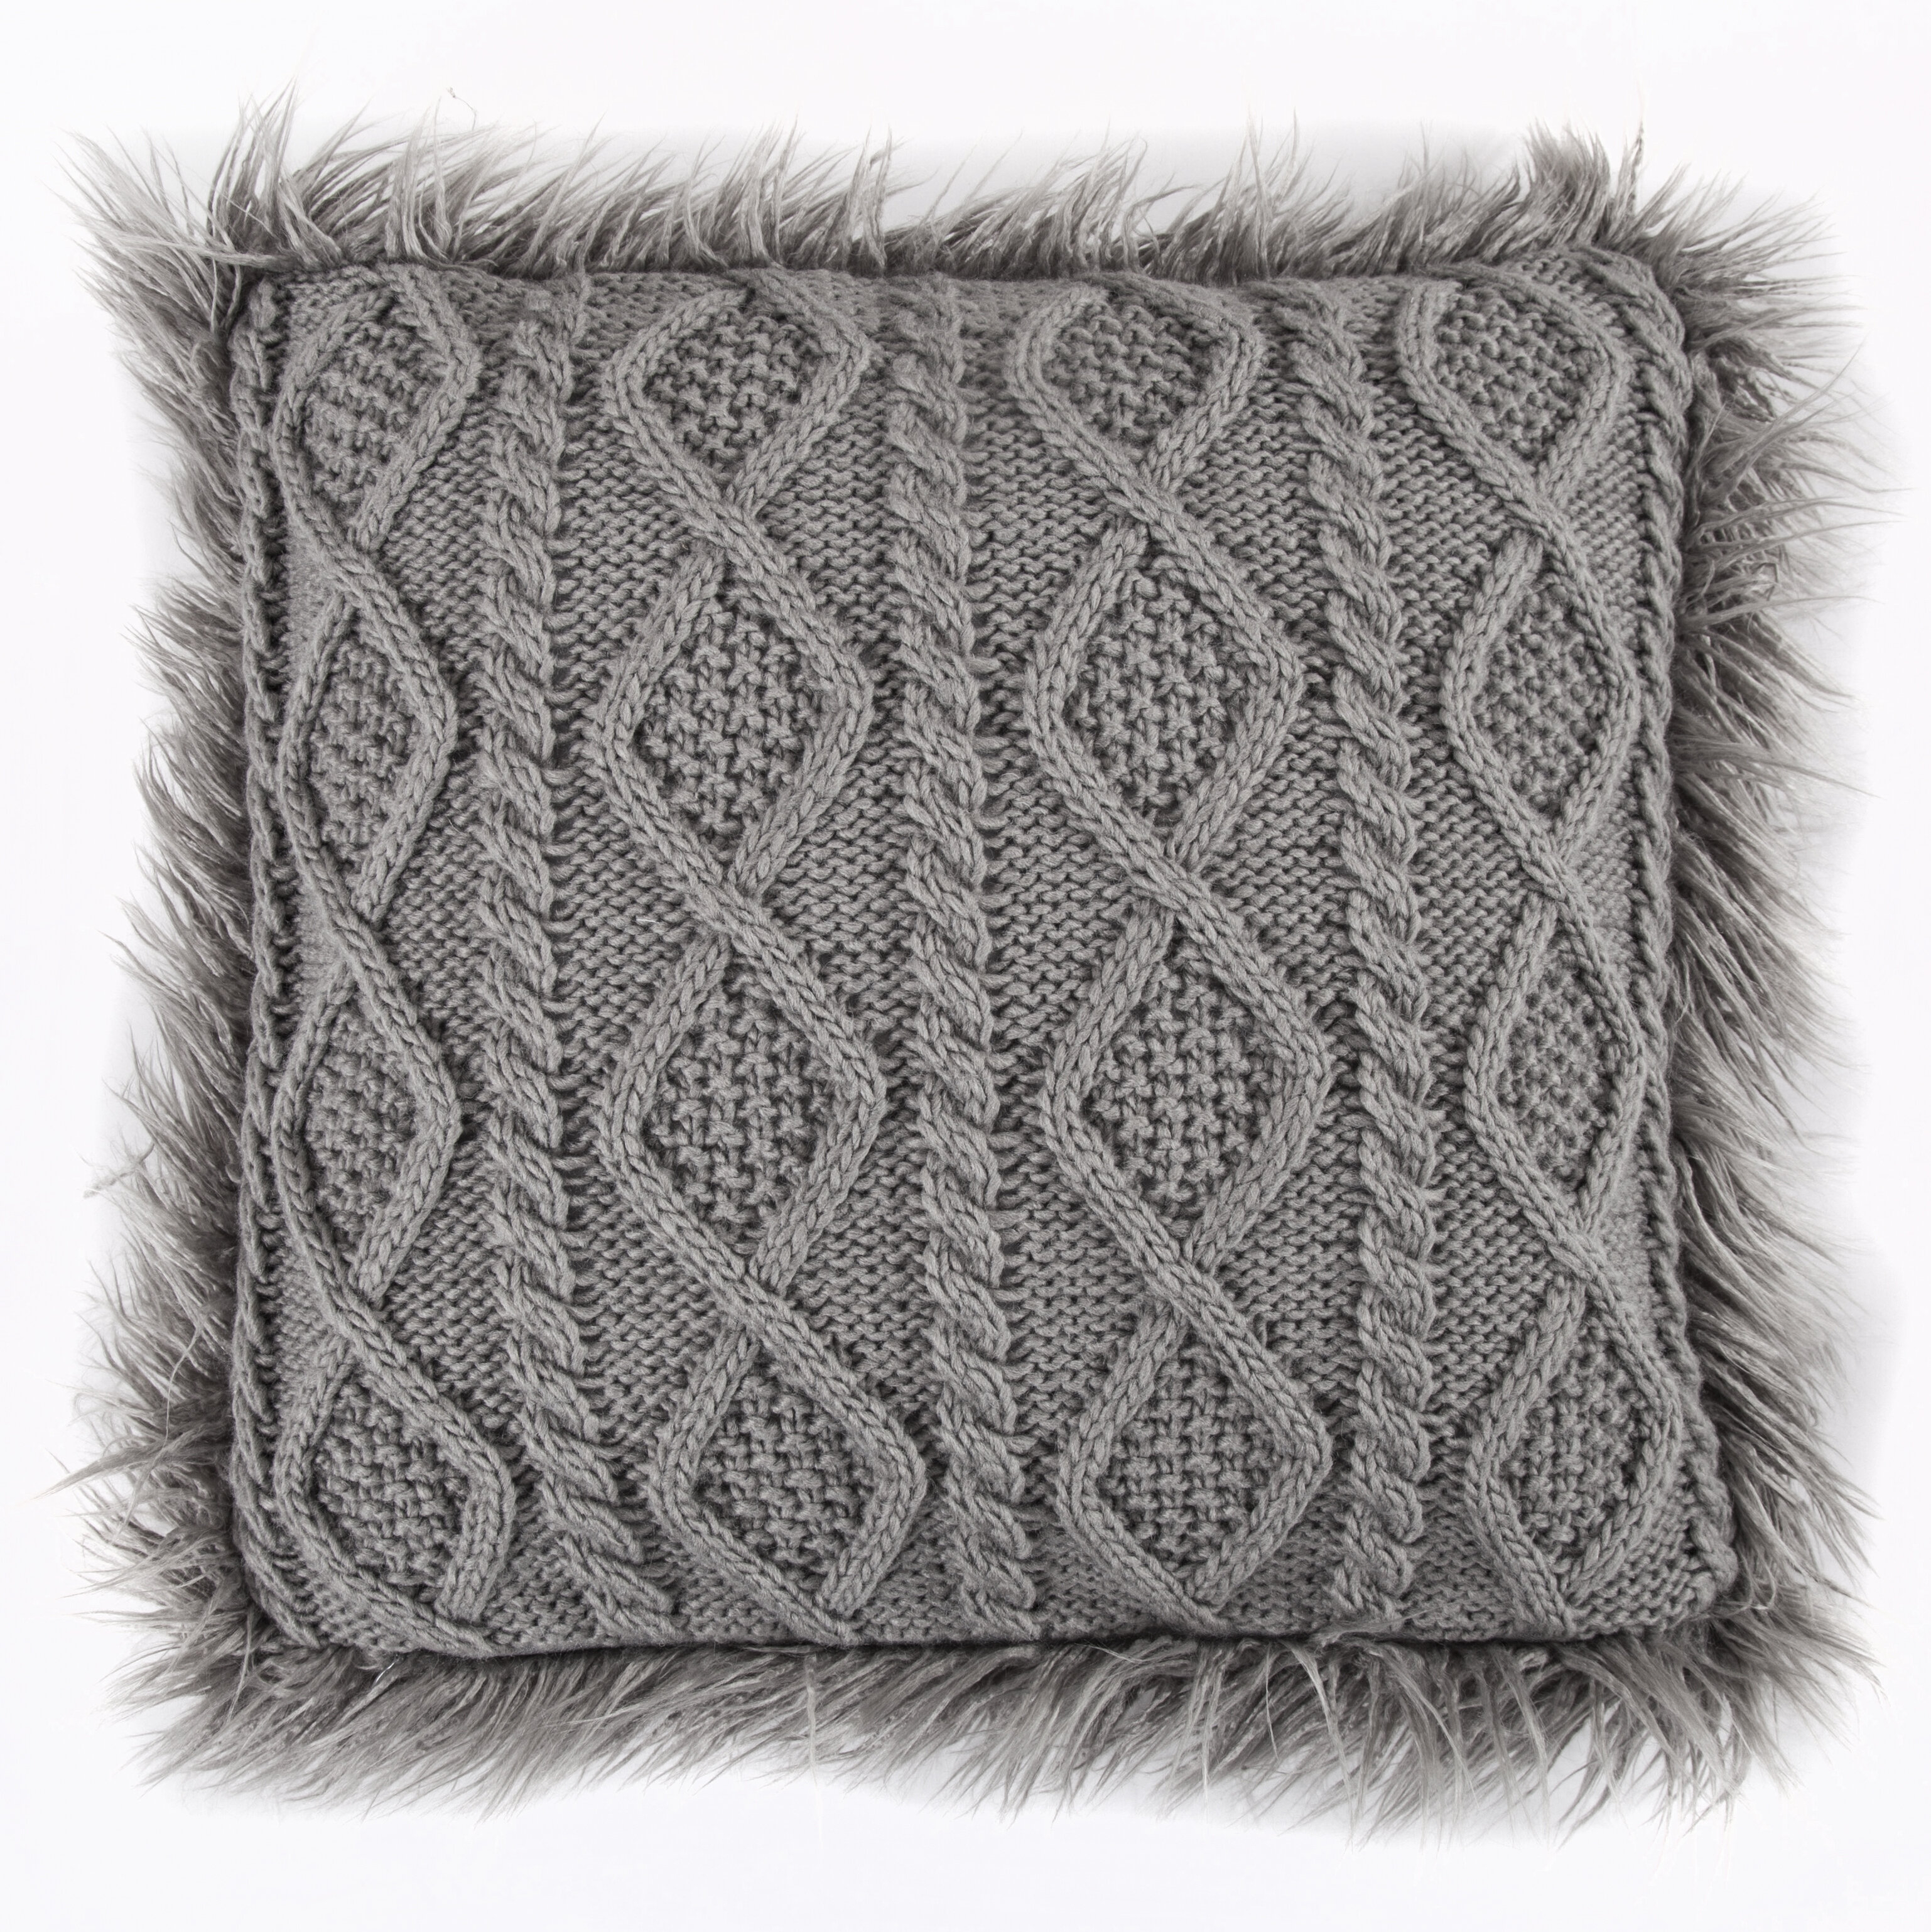 Knitting Pattern For Cushion Cover With Cables Nordic Cable Knit Throw Pillow